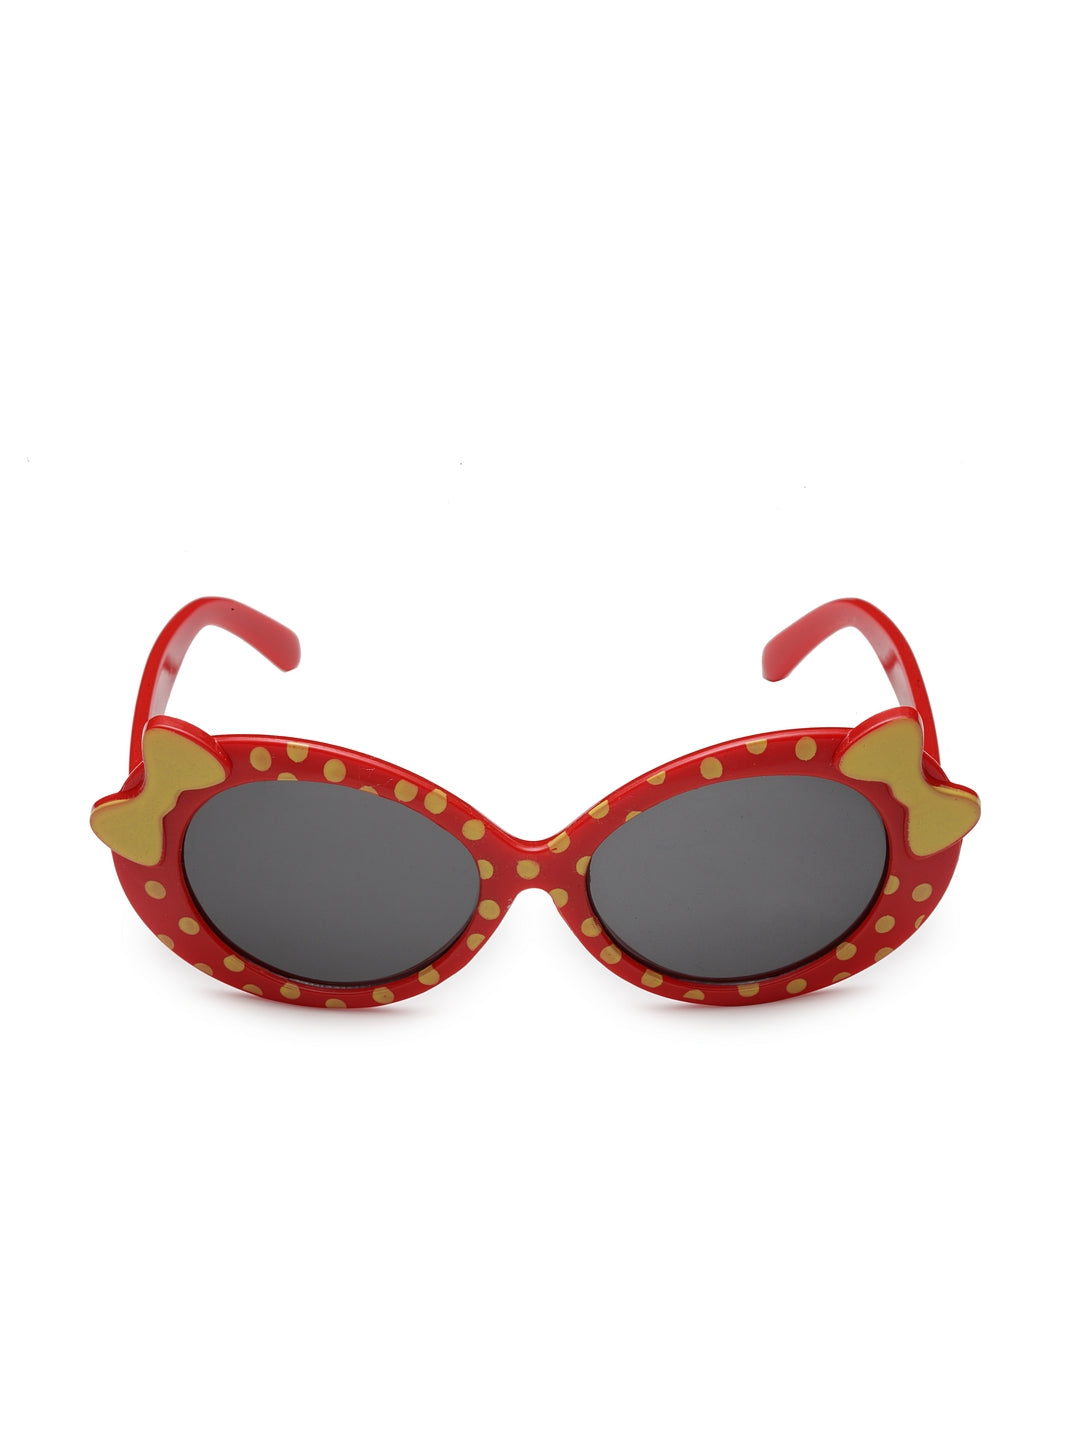 Stol'n Premium Attractive Fashionable UV-Protected Cat Eye Sunglasses - Red